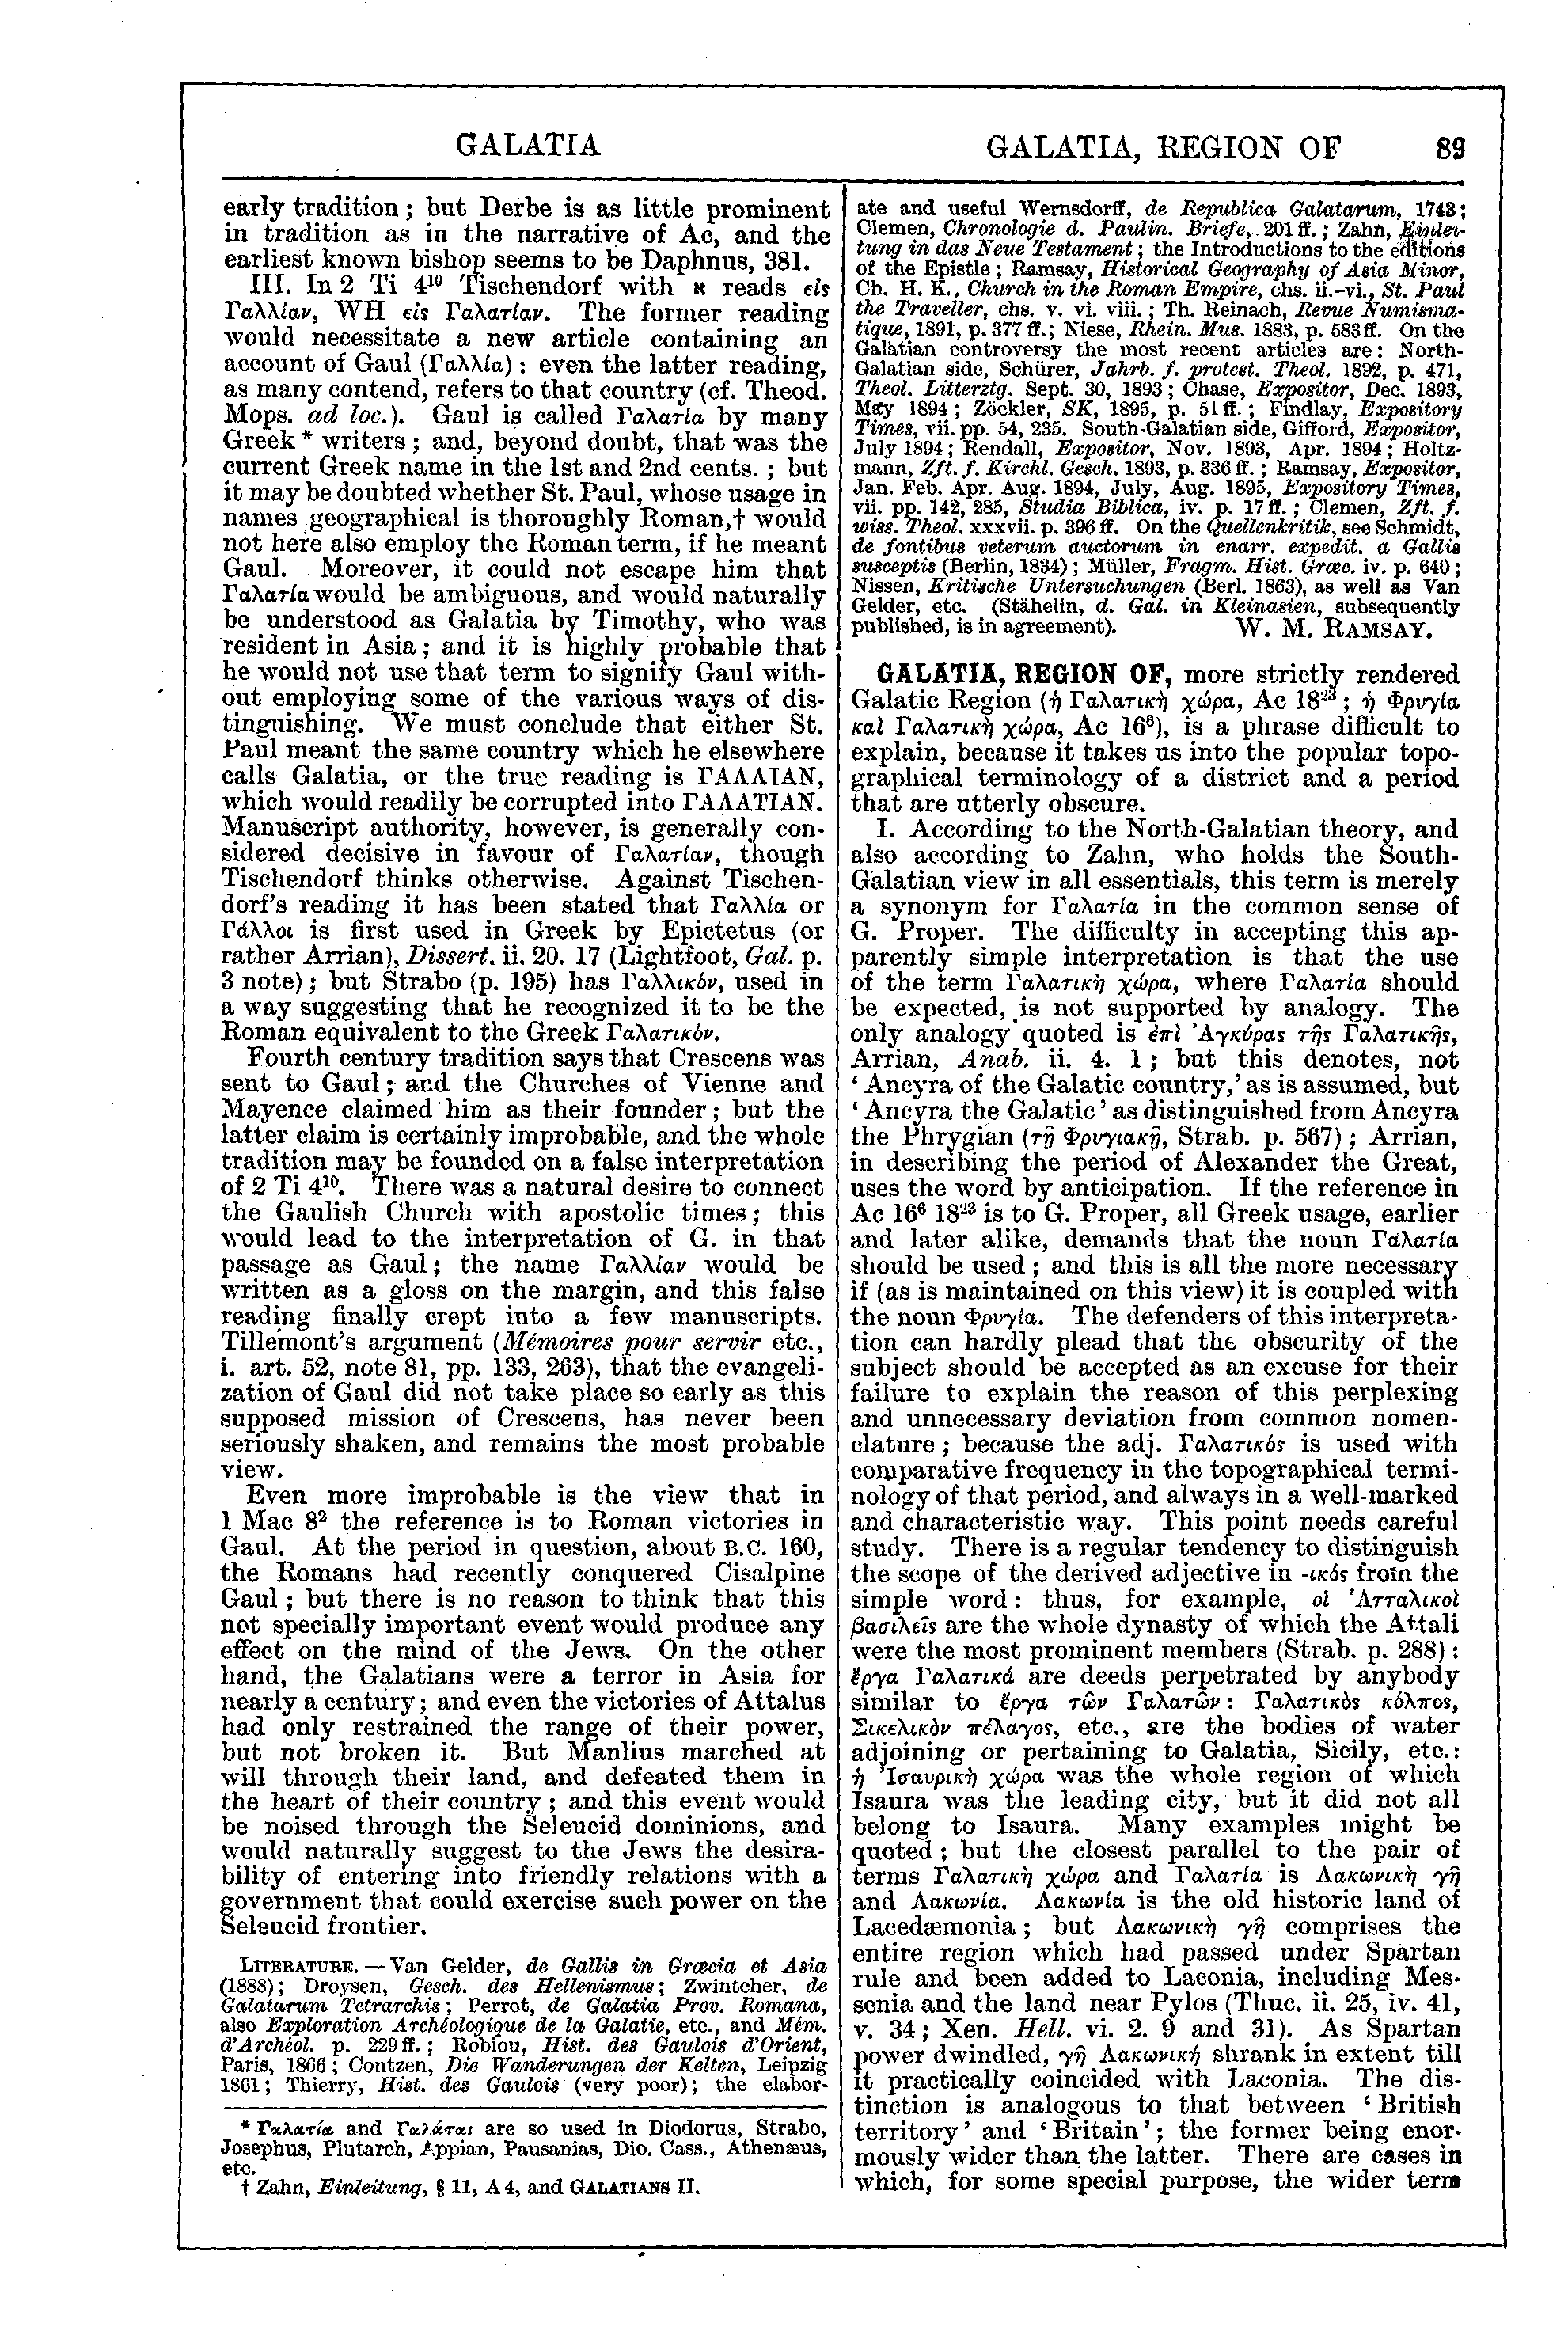 Image of page 89